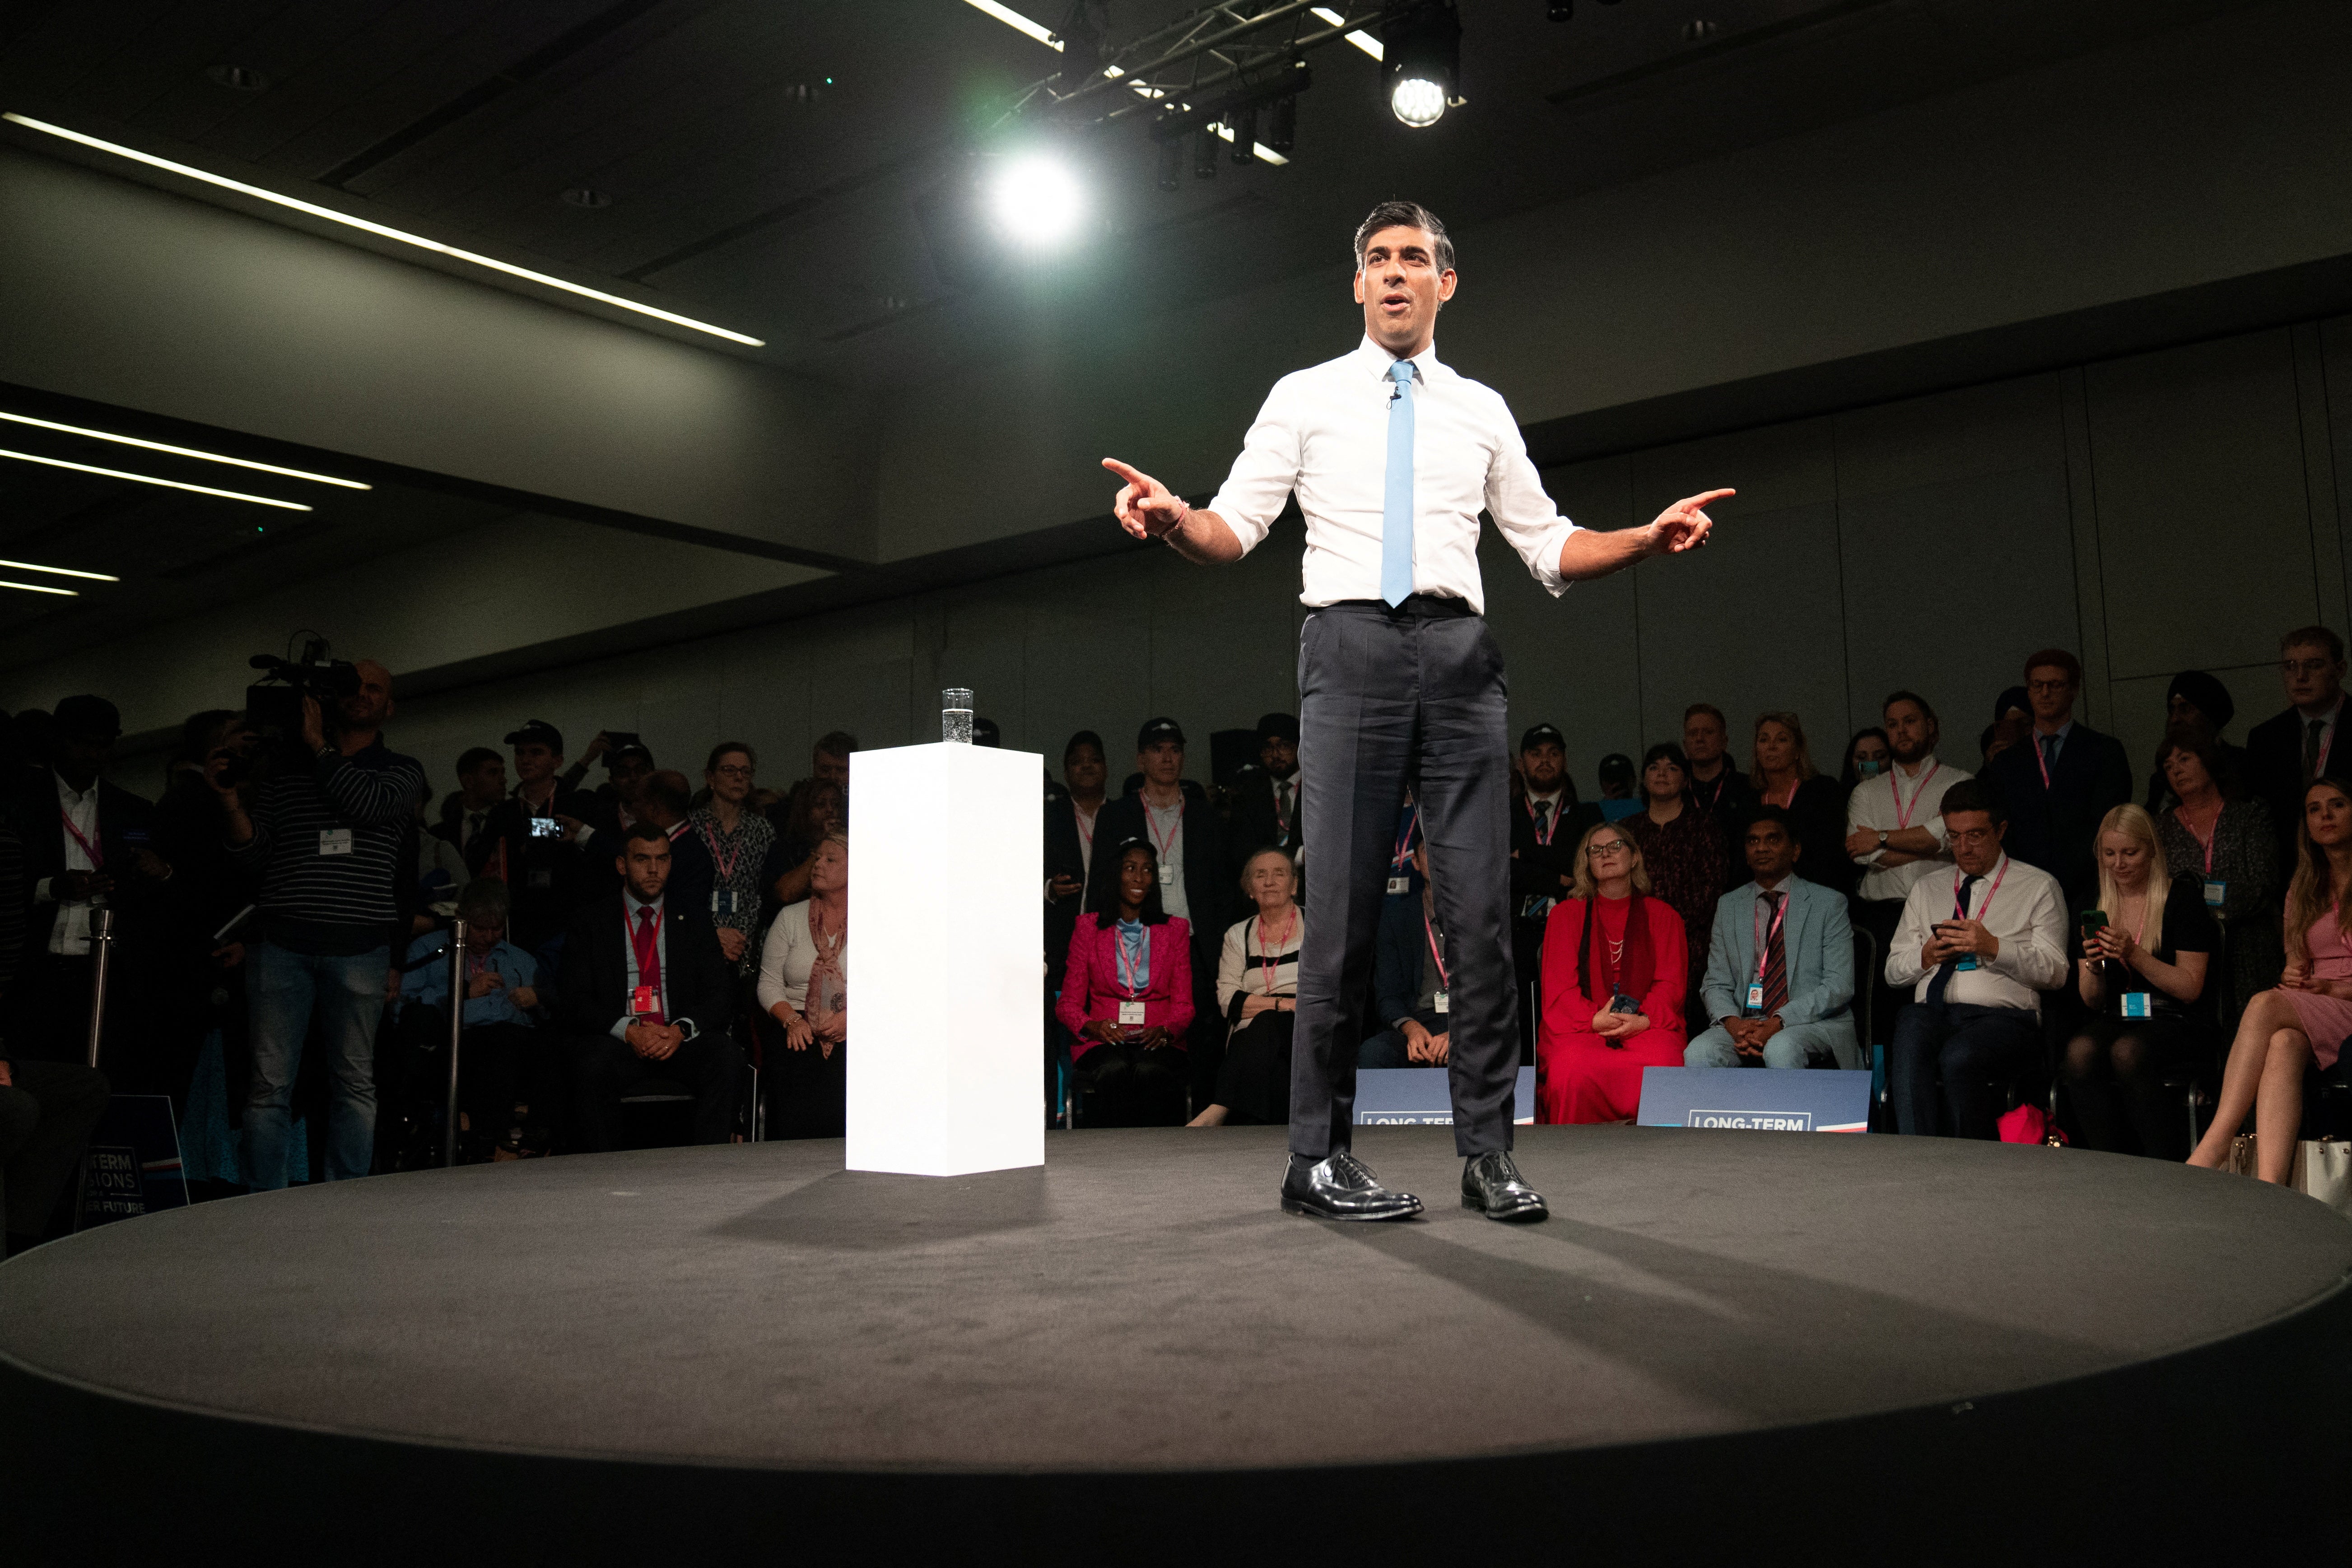 Rishi Sunak at a conference event for Tory members on Sunday night